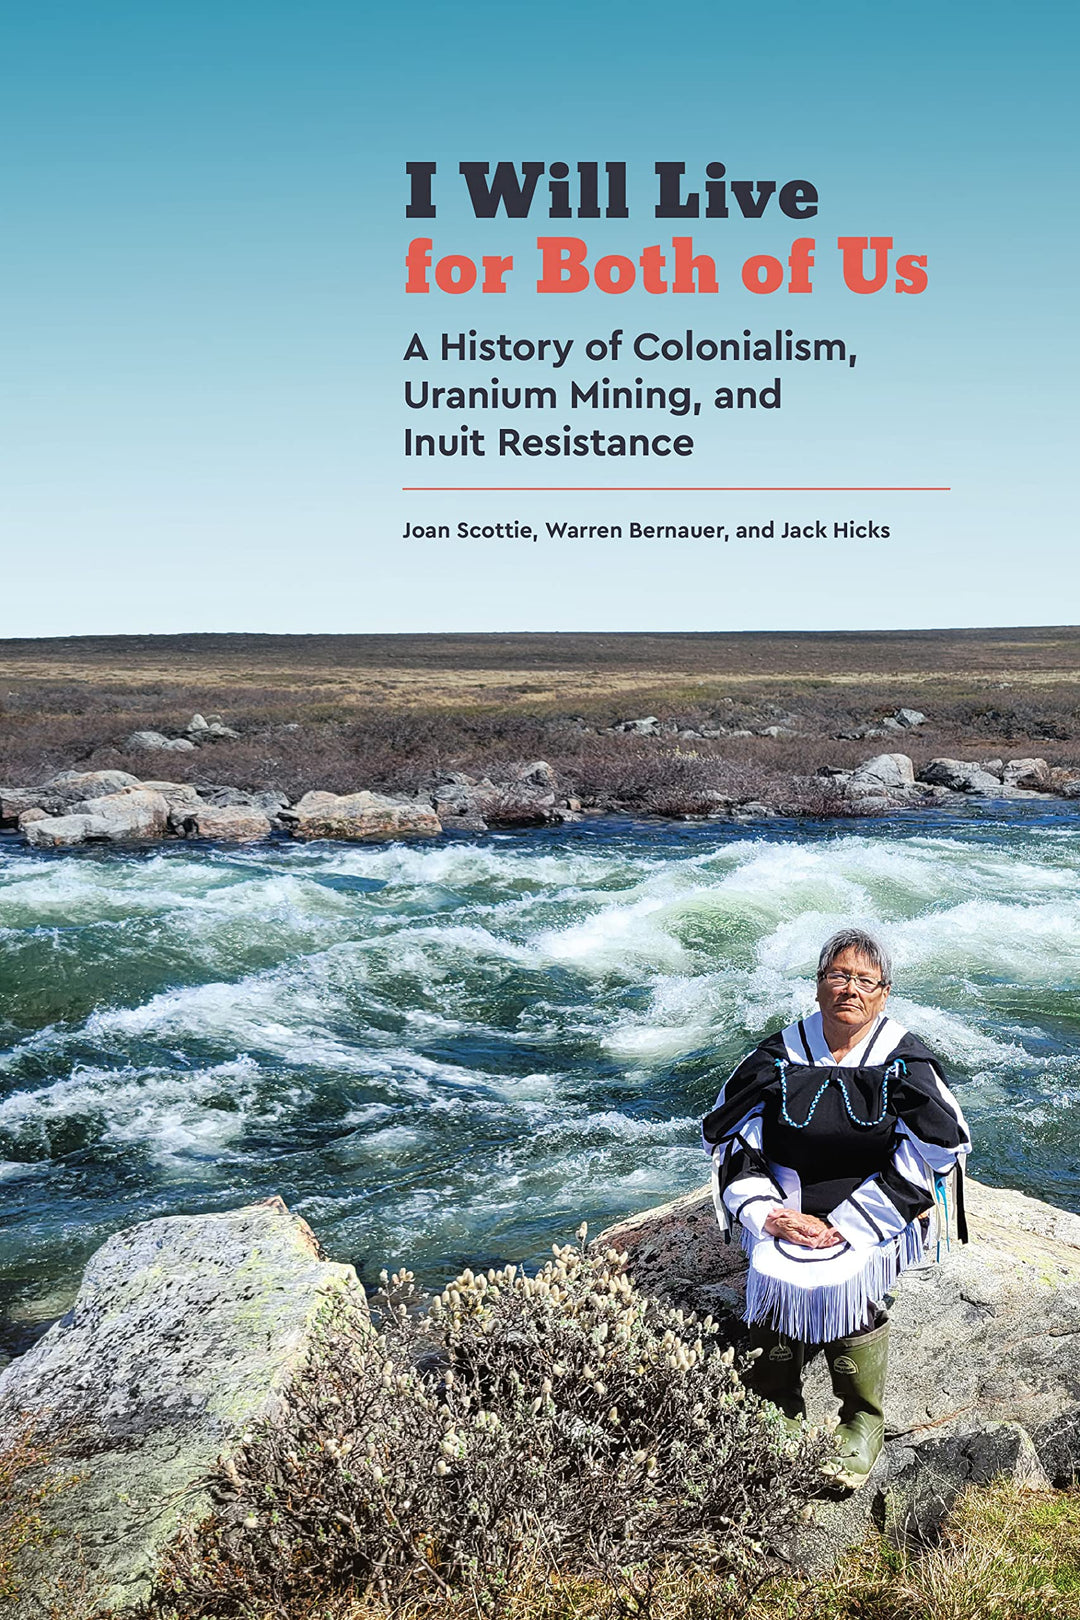 I Will Live for Both of Us: A History of Colonialism, Uranium Mining, and Inuit Resistance by Joan Scottie et al.